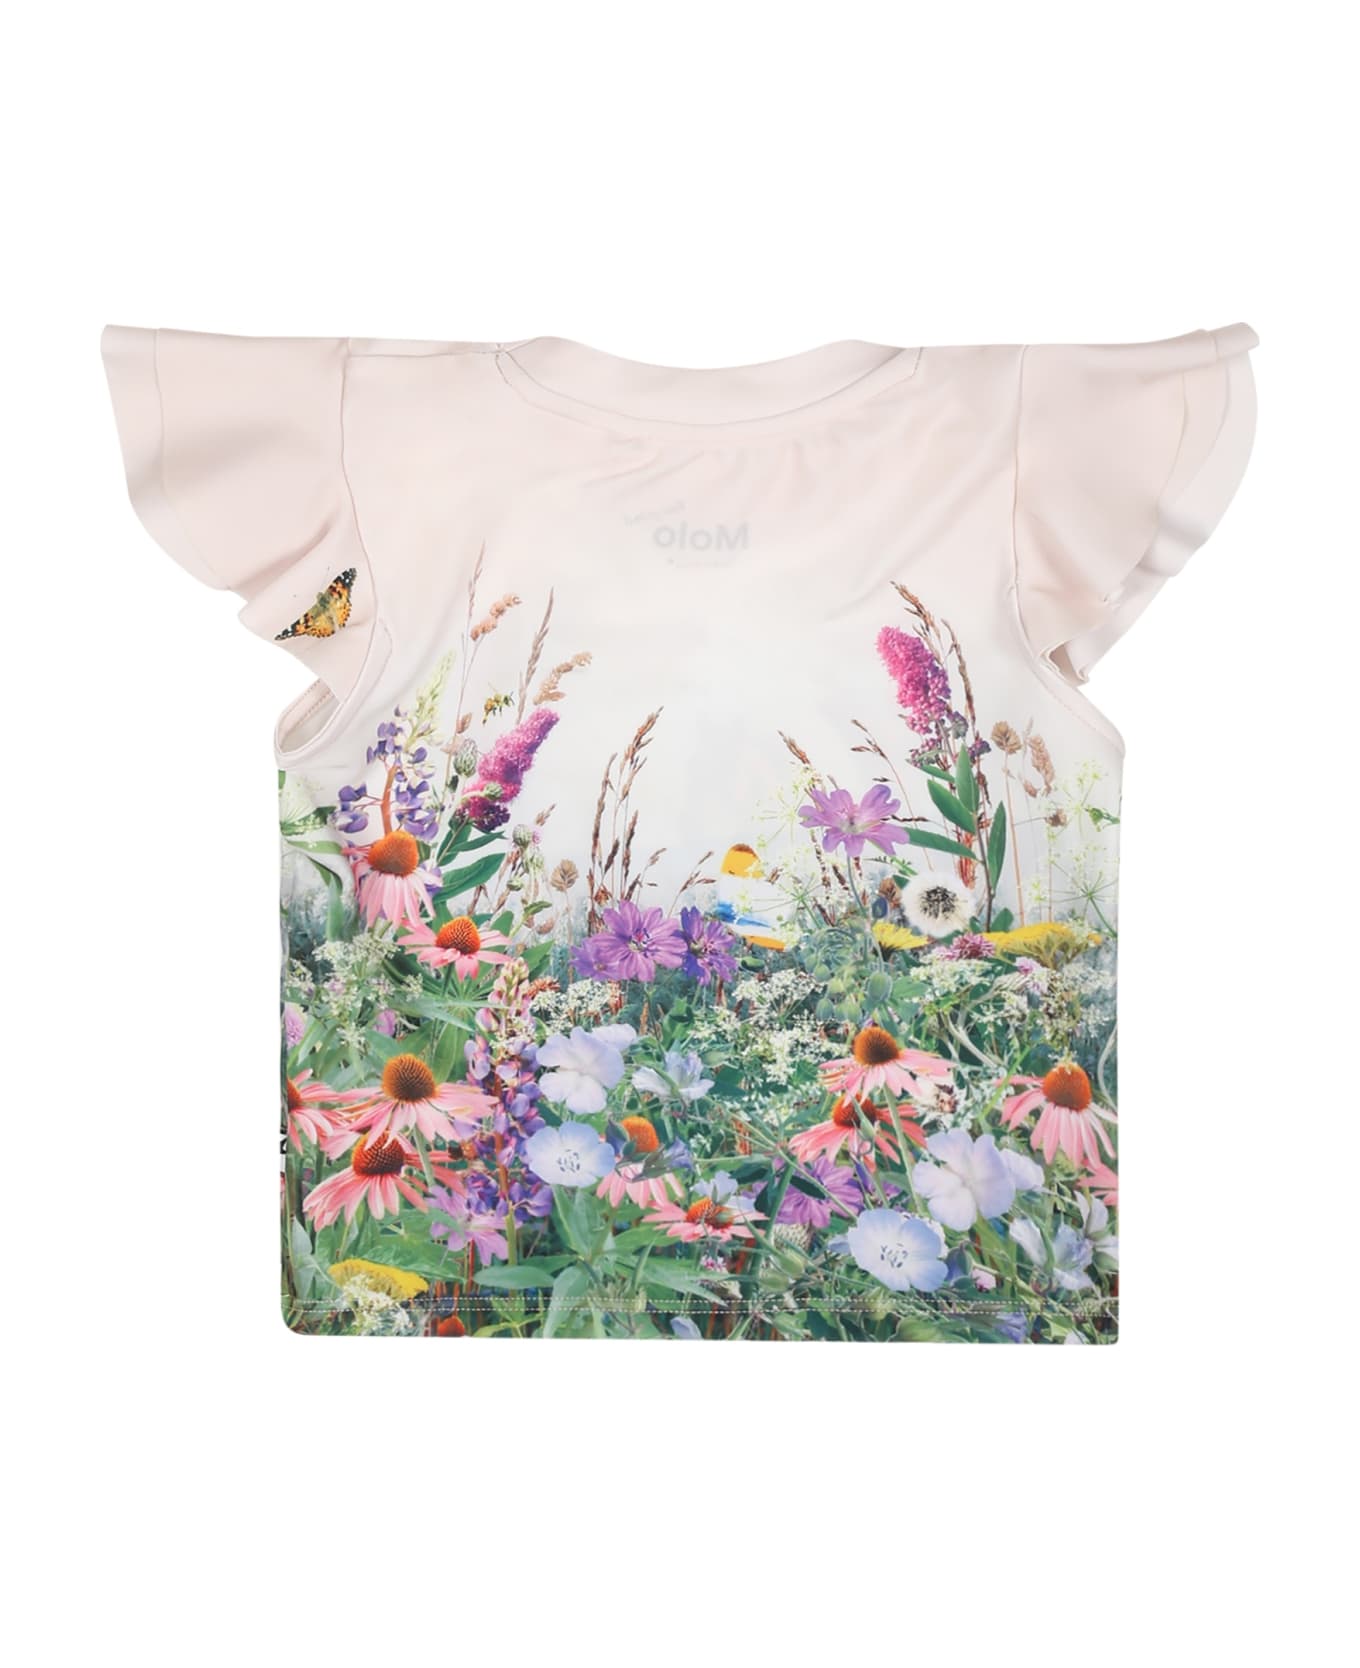 Molo Ivory Anti Uv T-shirt For Baby Girl With Horses And Flowers Print - Ivory